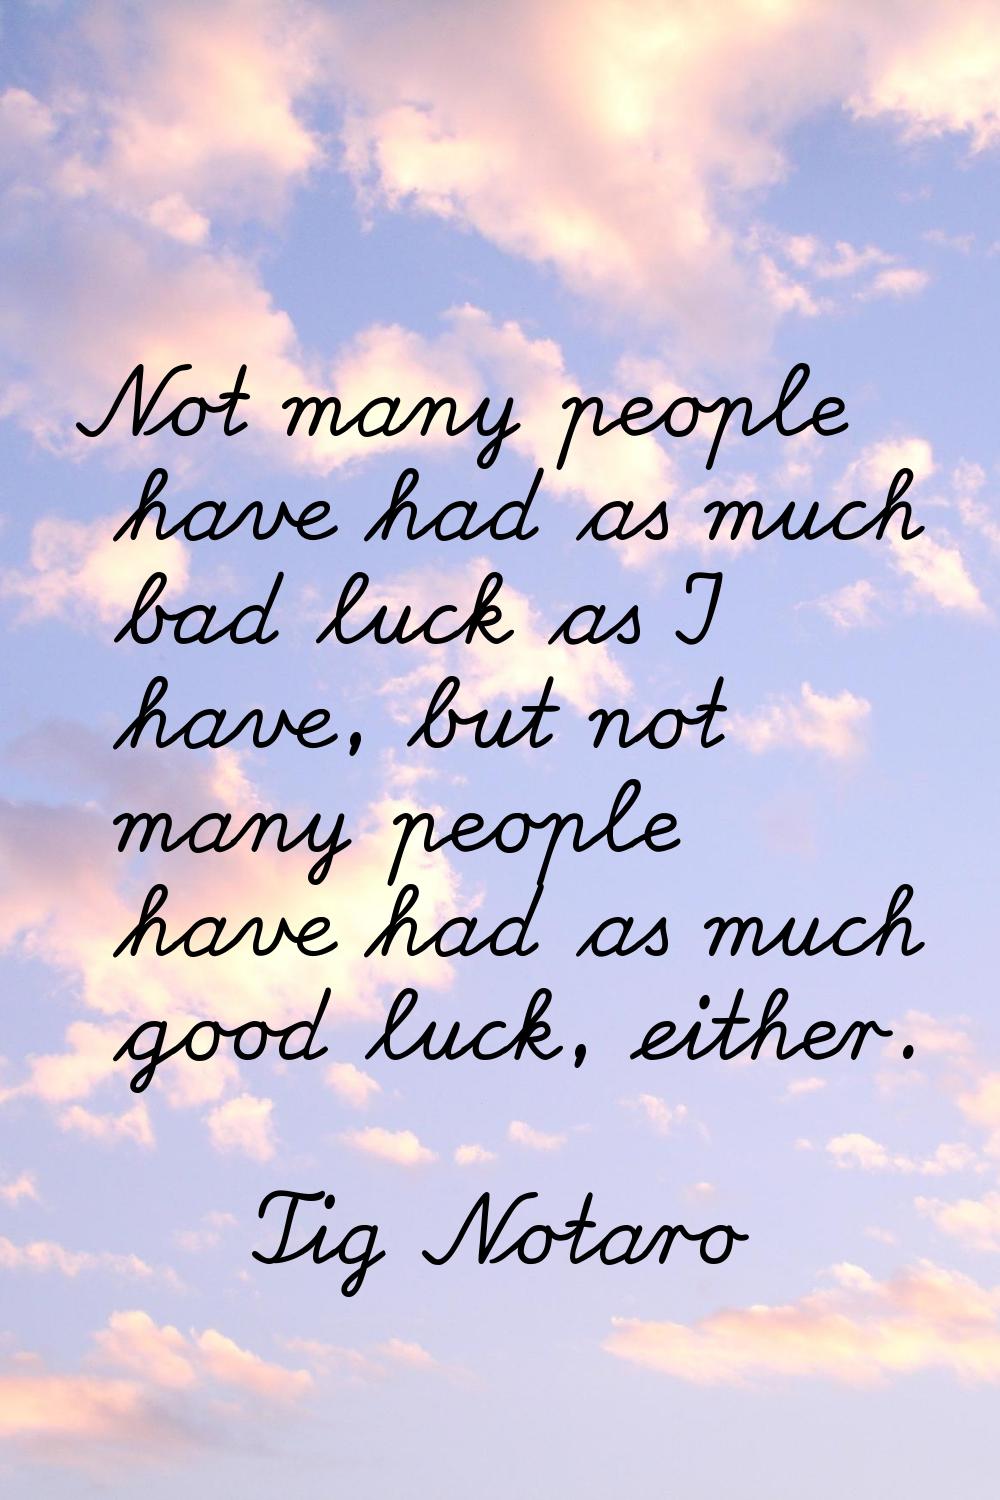 Not many people have had as much bad luck as I have, but not many people have had as much good luck